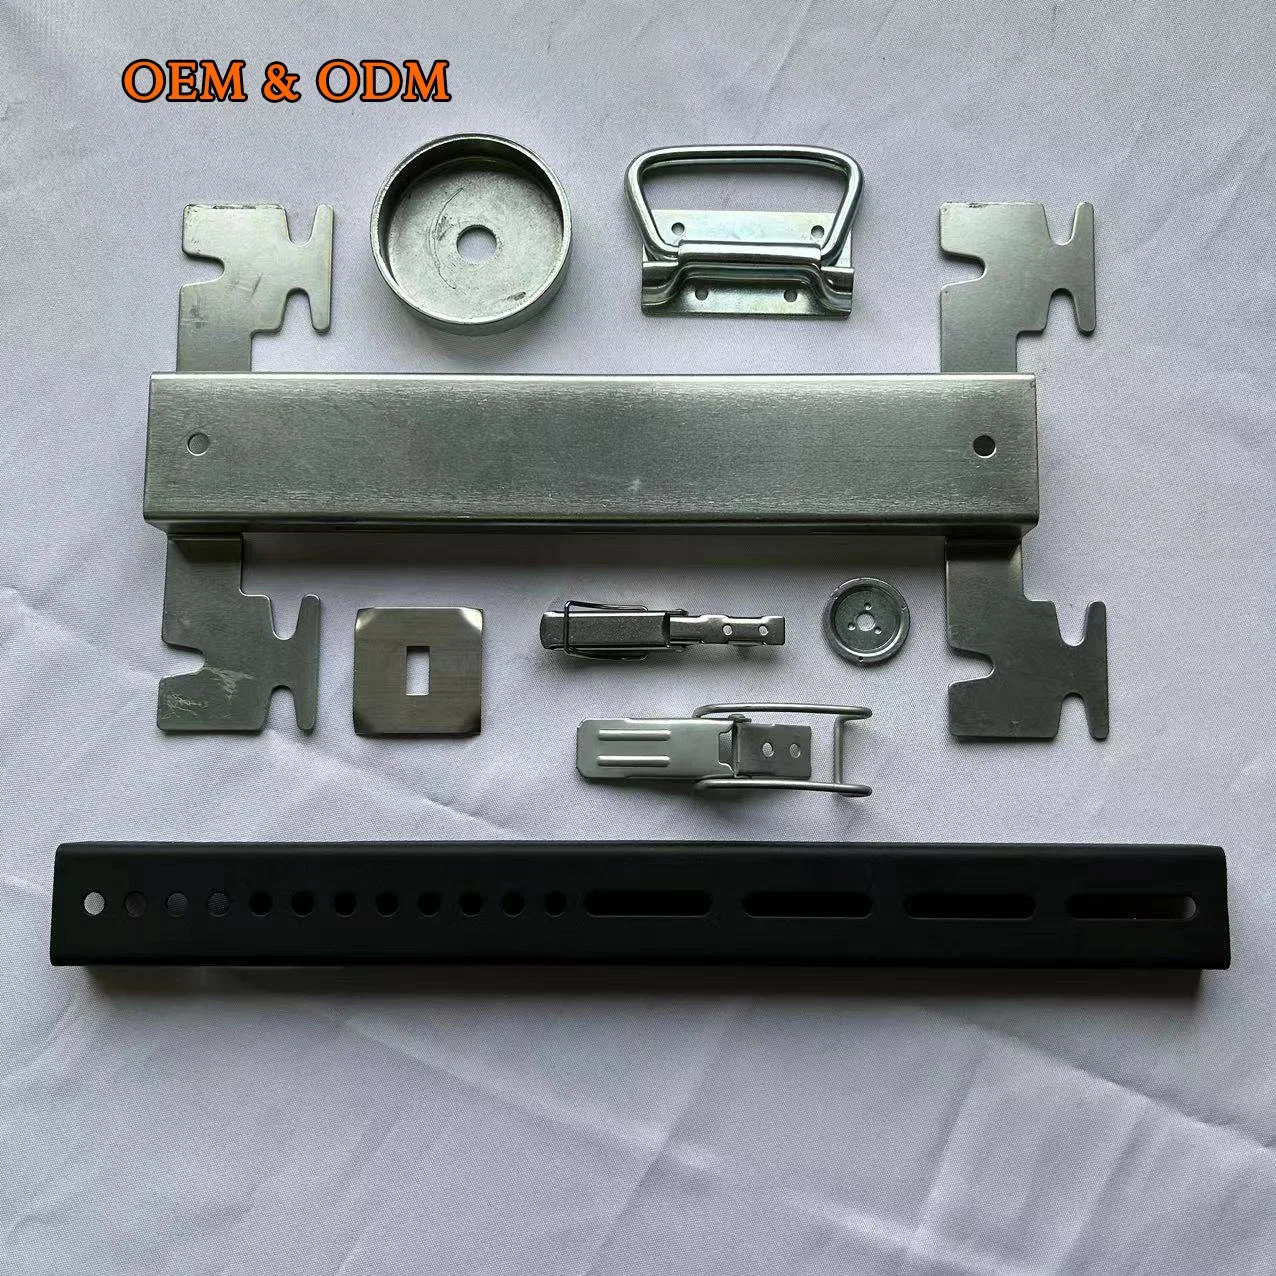 OEM Customized Furniture Metal Welding Accessories Furniture Hardwares for Forming Process Stamping with Multi-Position Tolerance 0.01mm